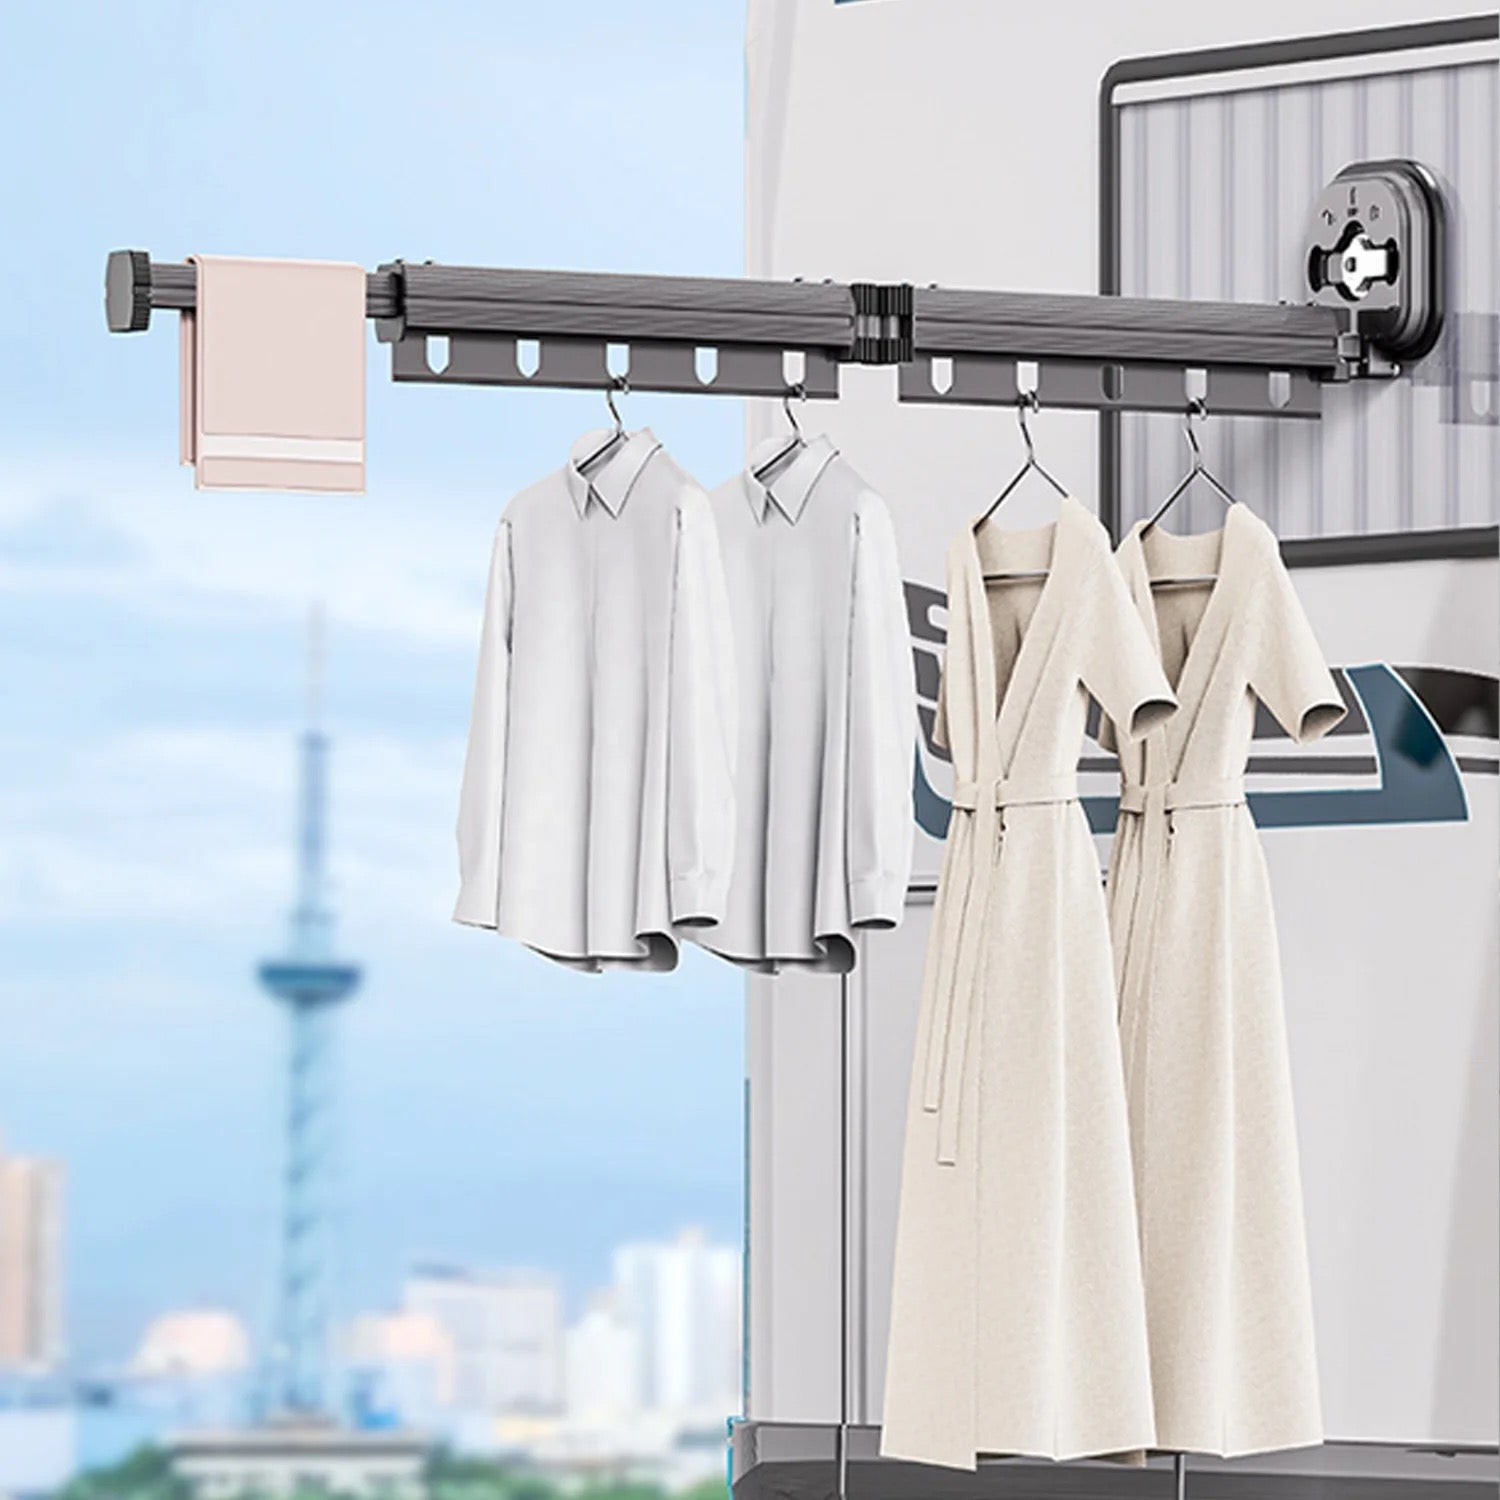 Cloths hung on a Folding Laundry Rack which is mounted on a iron wall